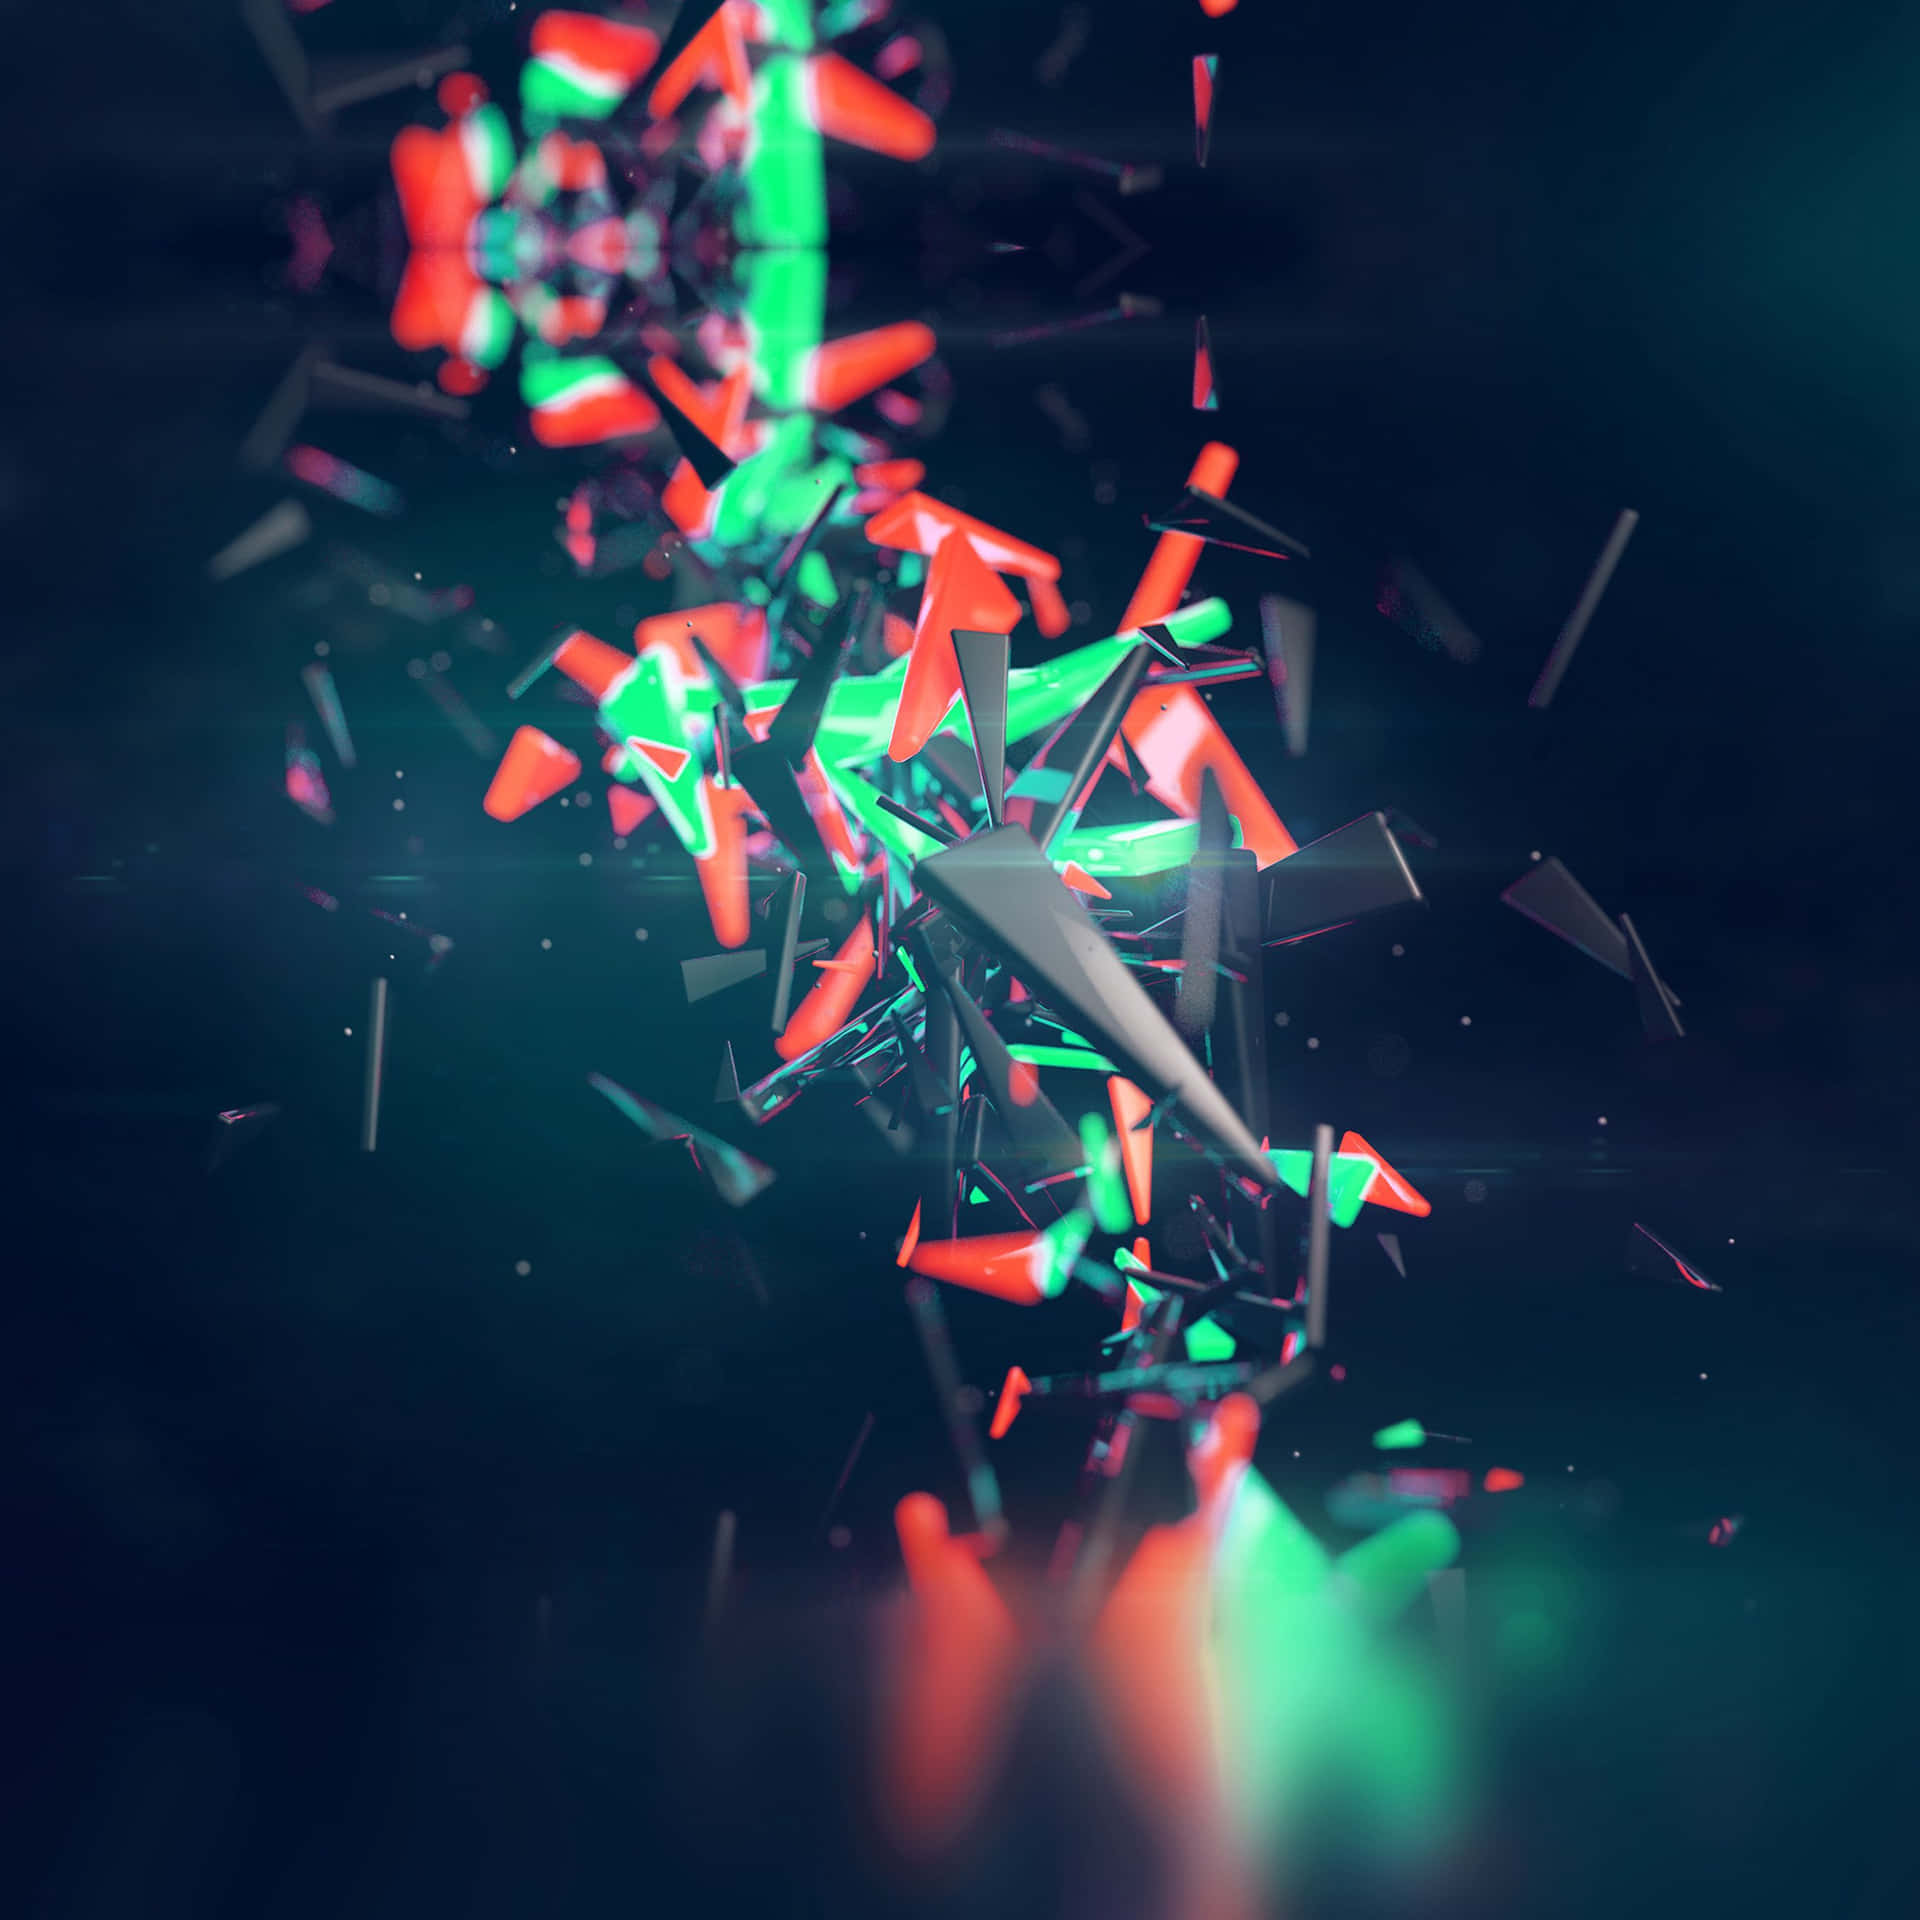 A Colorful Abstract Image Of A Broken Glass